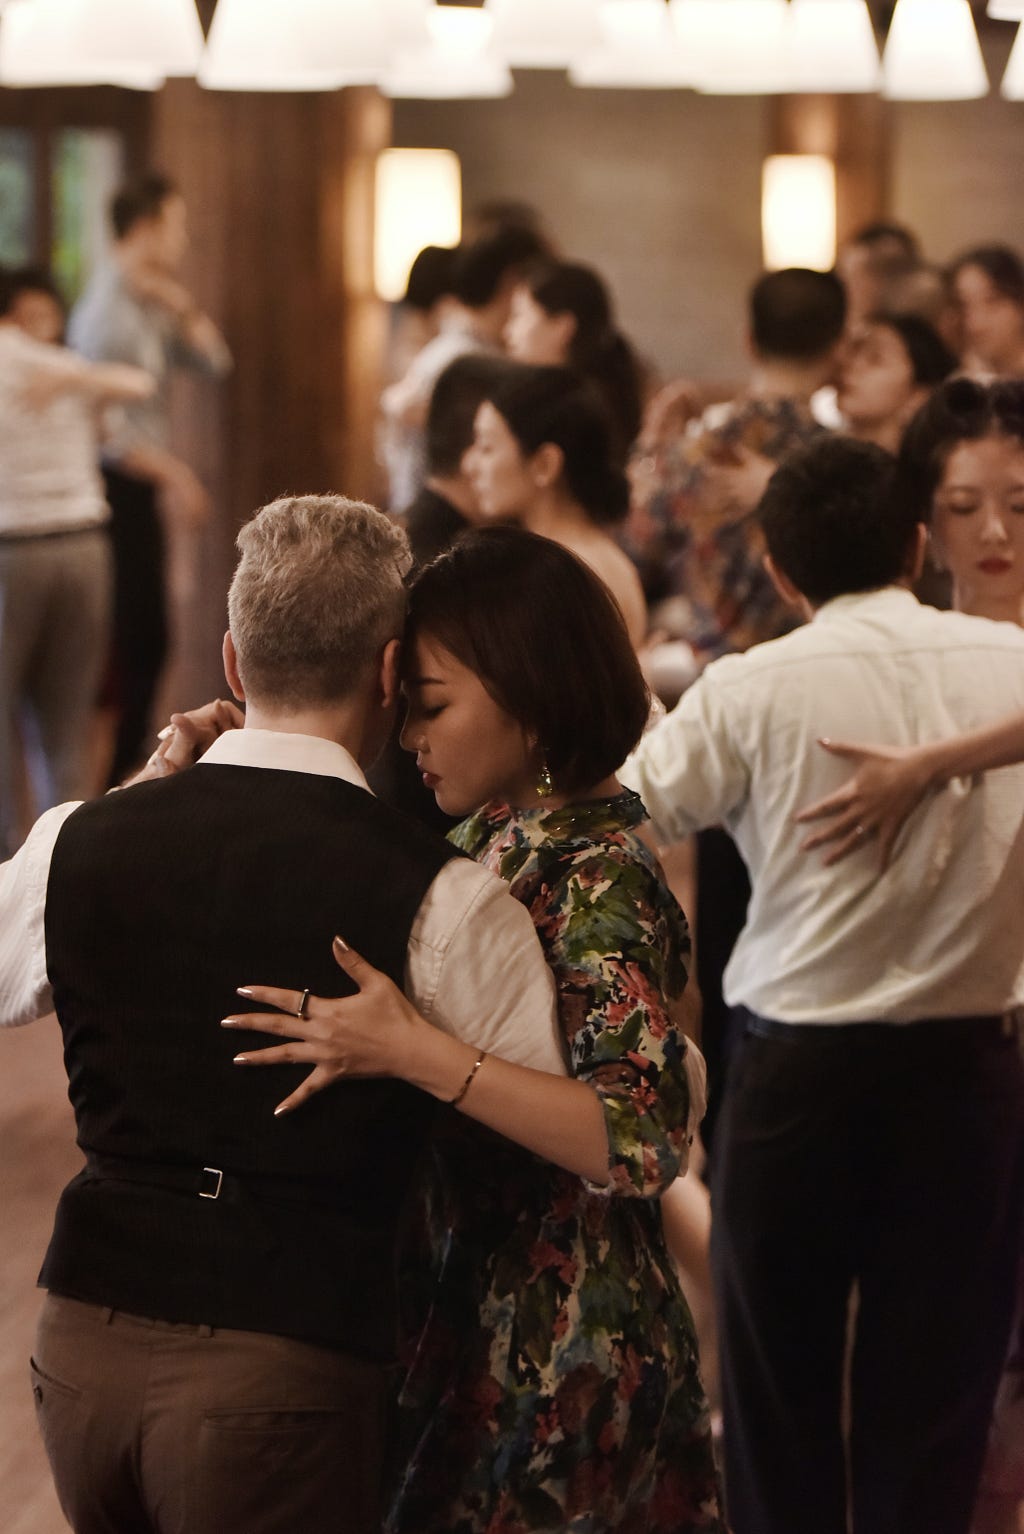 A group of people dance in a room. They are dancing in couples, each couple in a close embrace.